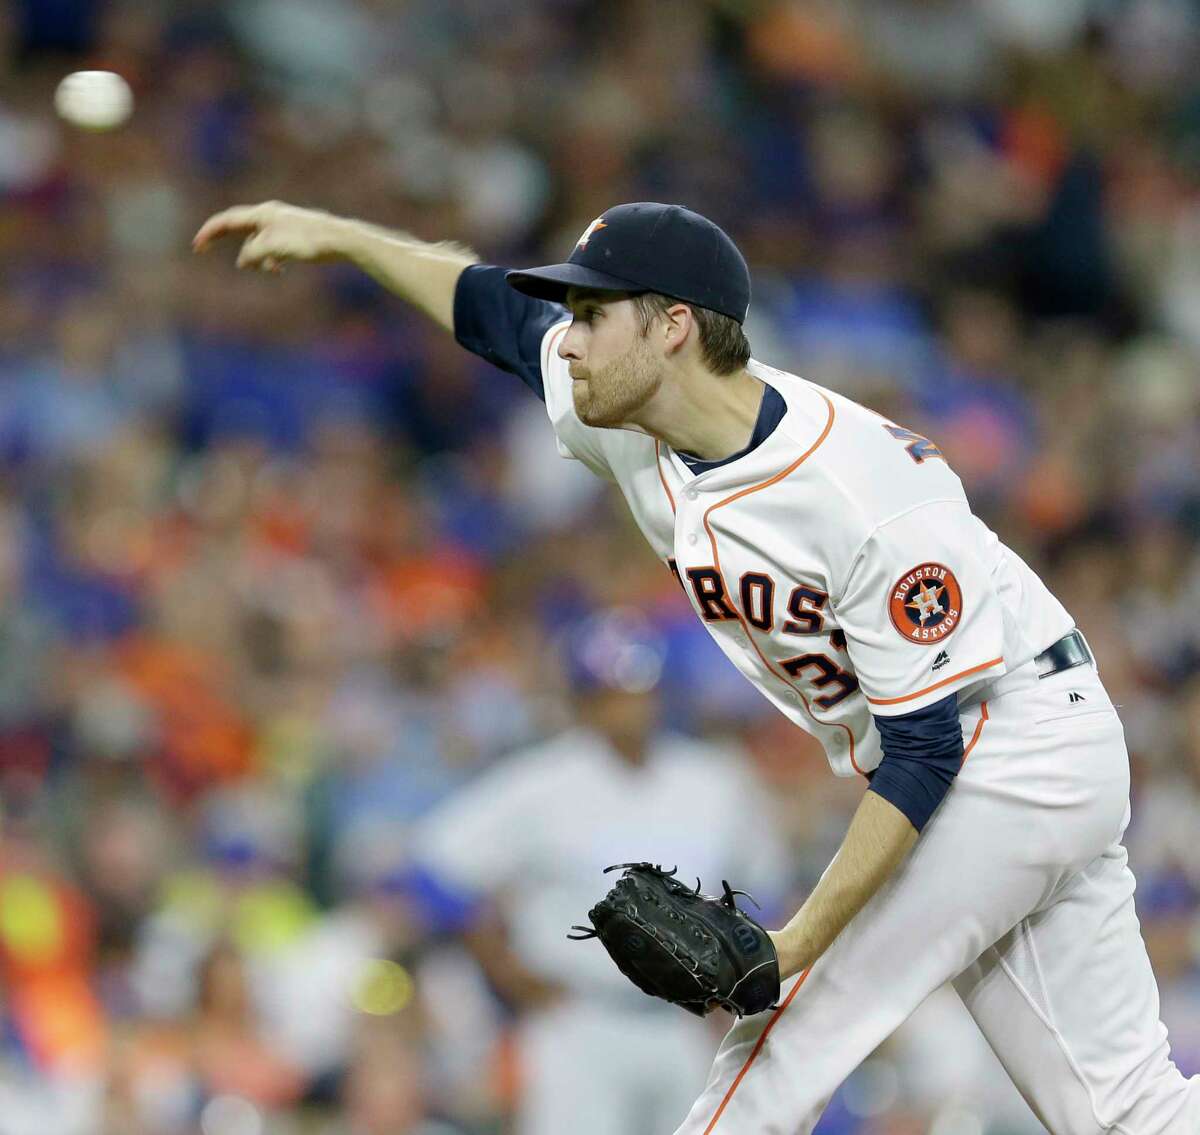 Houston Astros Collin McHugh pitches against the Chicago Cubs during game at Minute Maid Park Saturday, Sept. 10, 2016, in Houston. ( Melissa Phillip / Houston Chronicle )